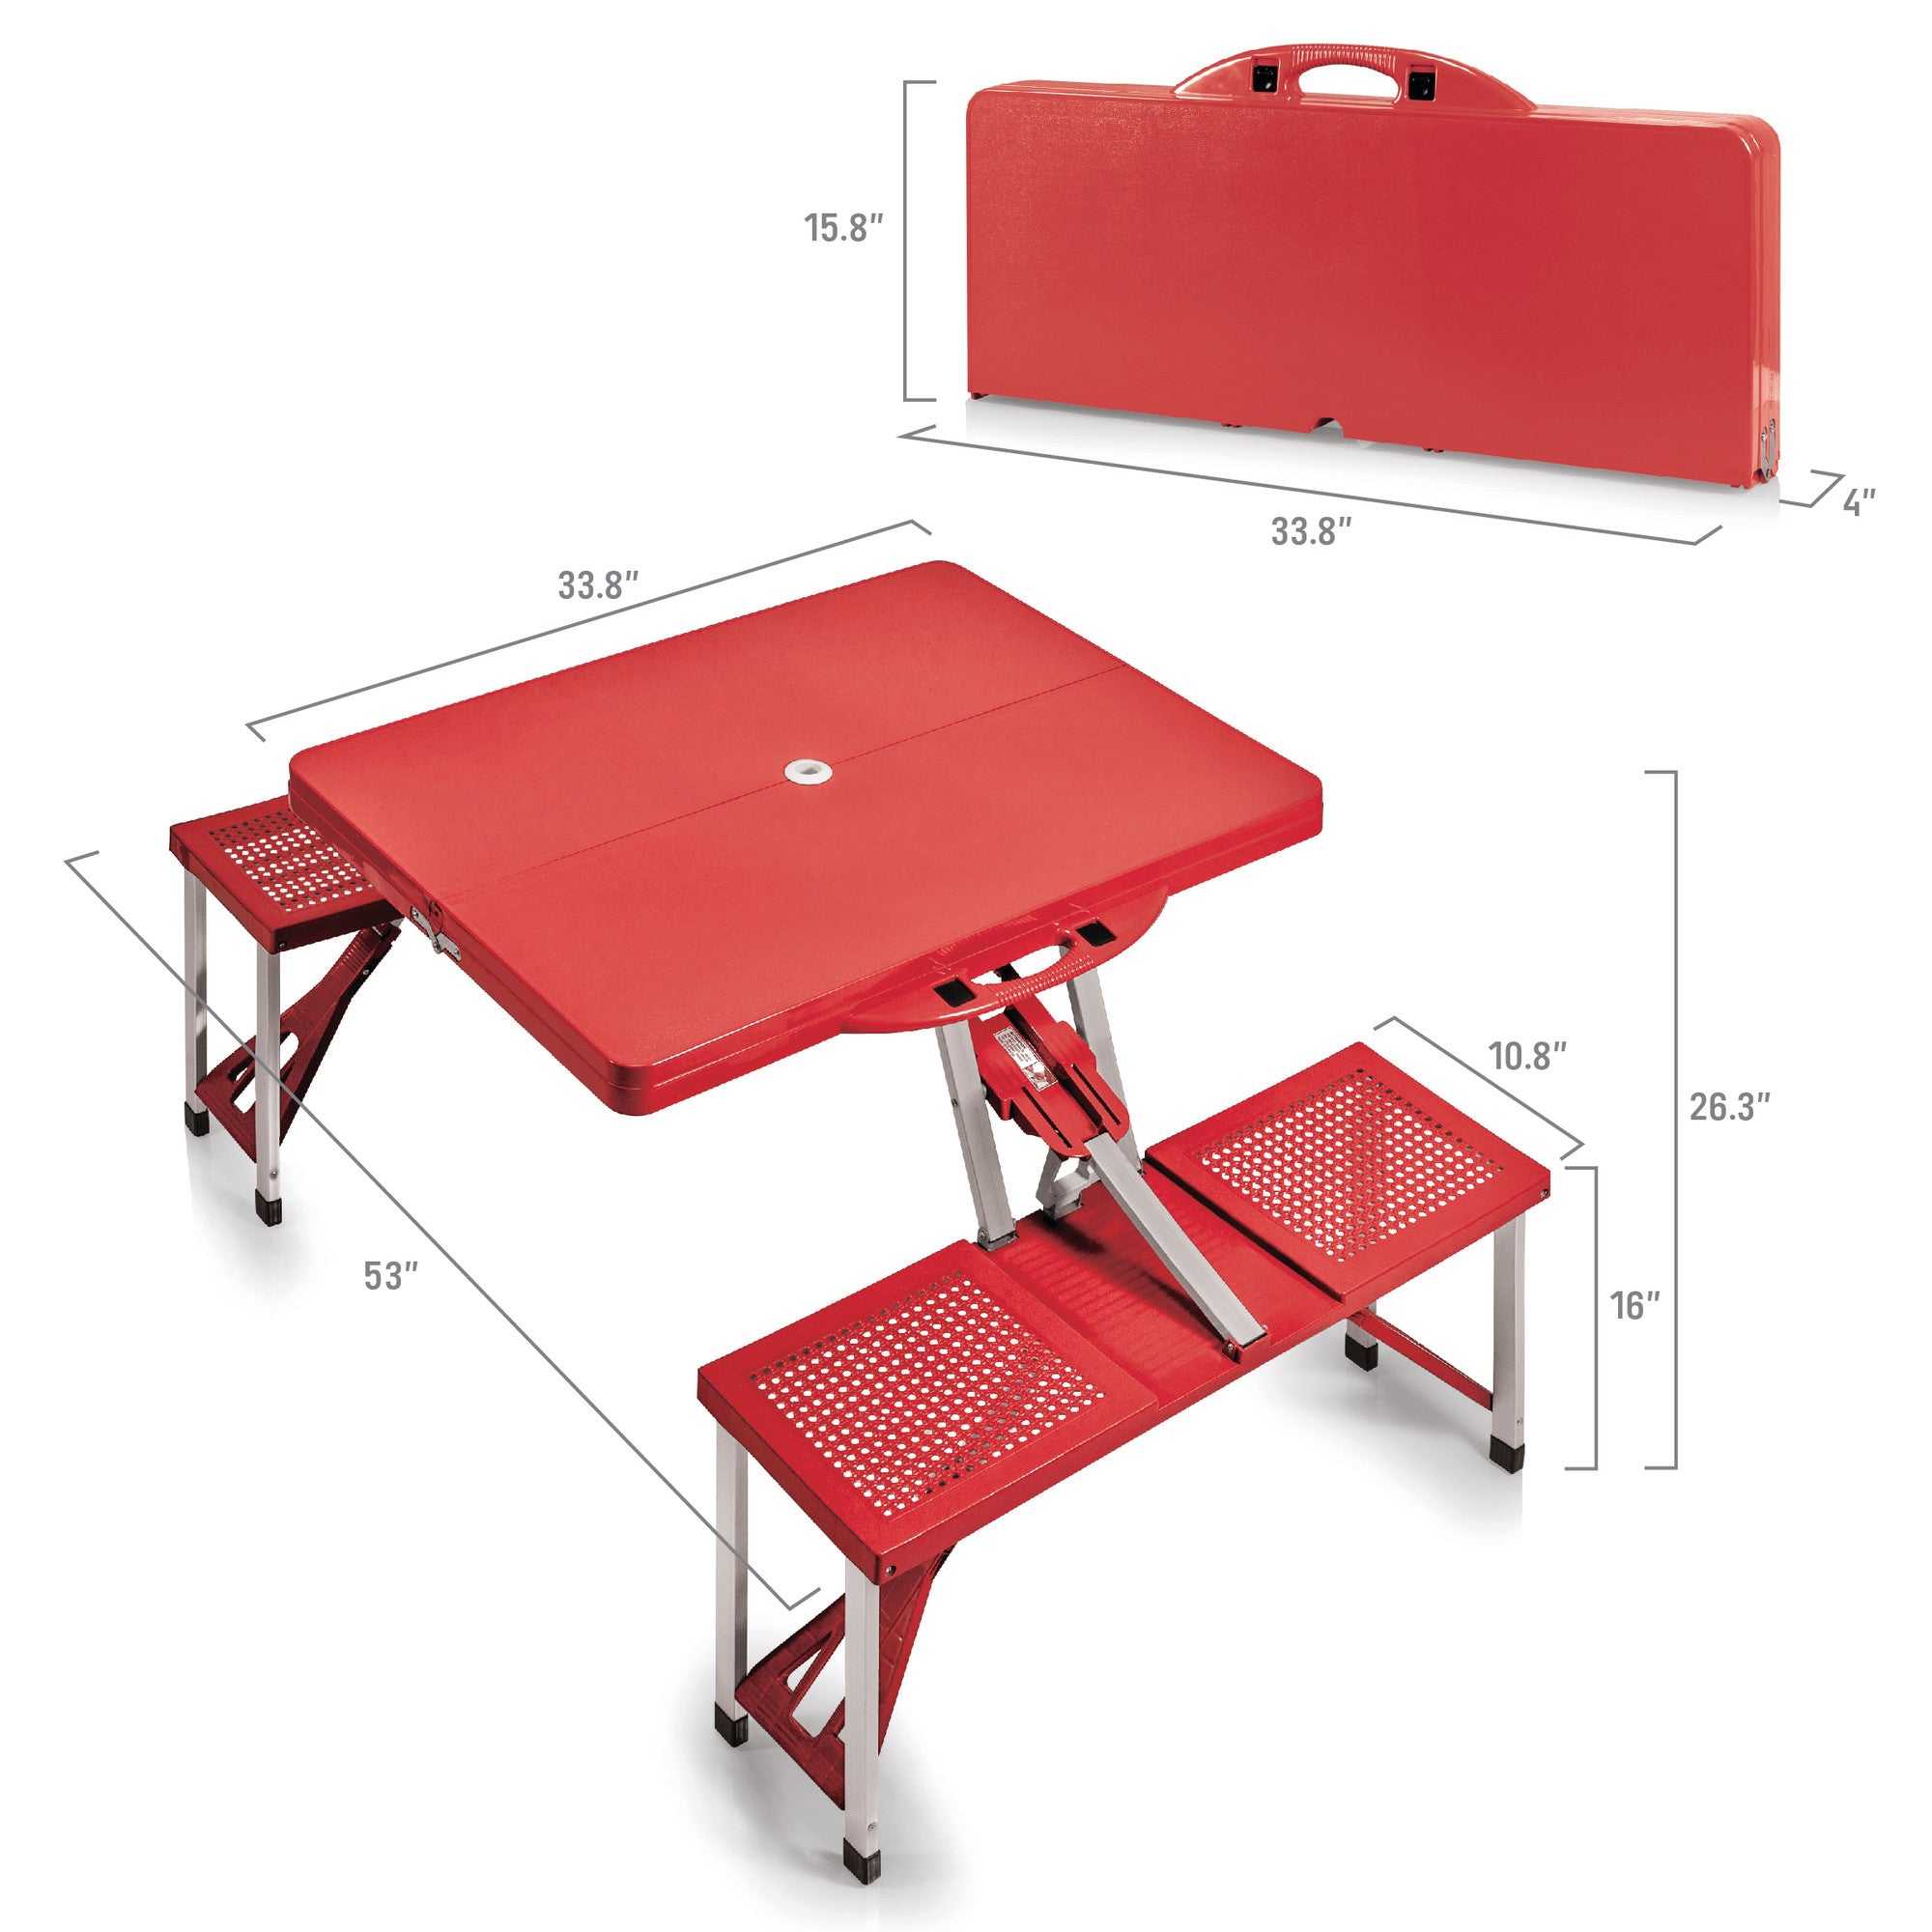 New Jersey Devils - Picnic Table Portable Folding Table with Seats